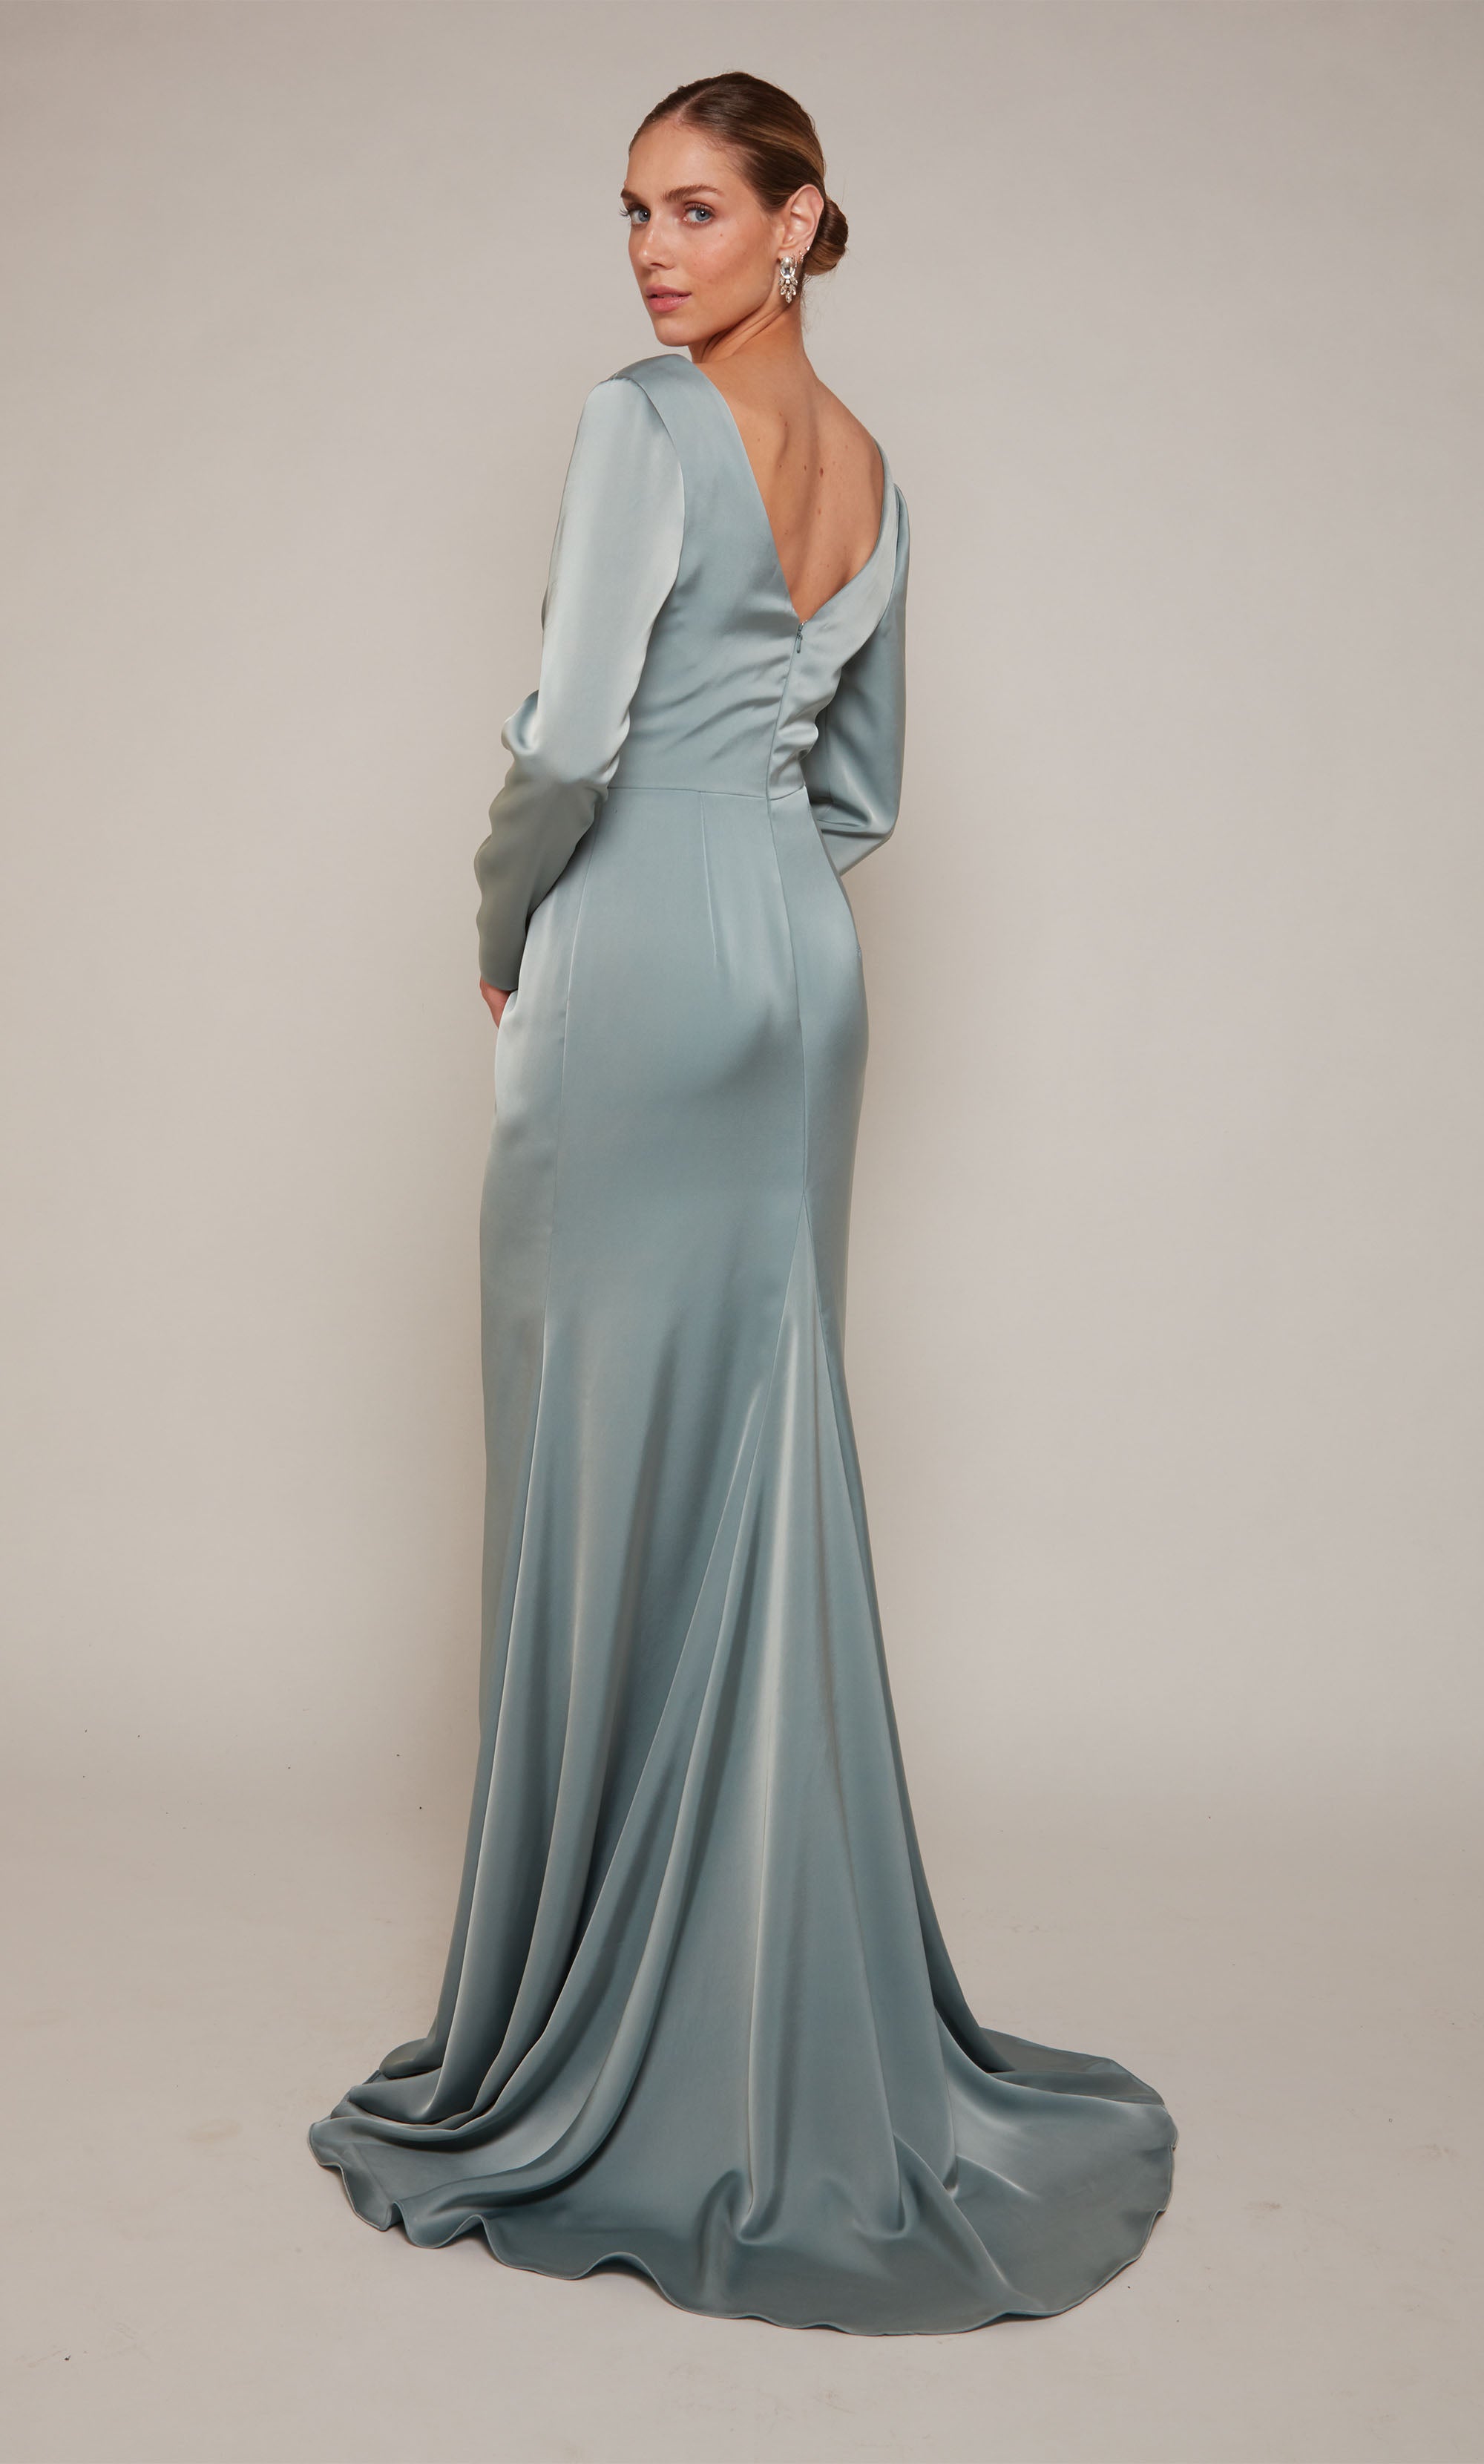 Dark Green Mermaid Prom Dress Plus Size New Long Sleeve Beading Appliques Evening  Gown For Women Cocktail Dress Vestidos De Gala From Missudress, $200 |  DHgate.Com